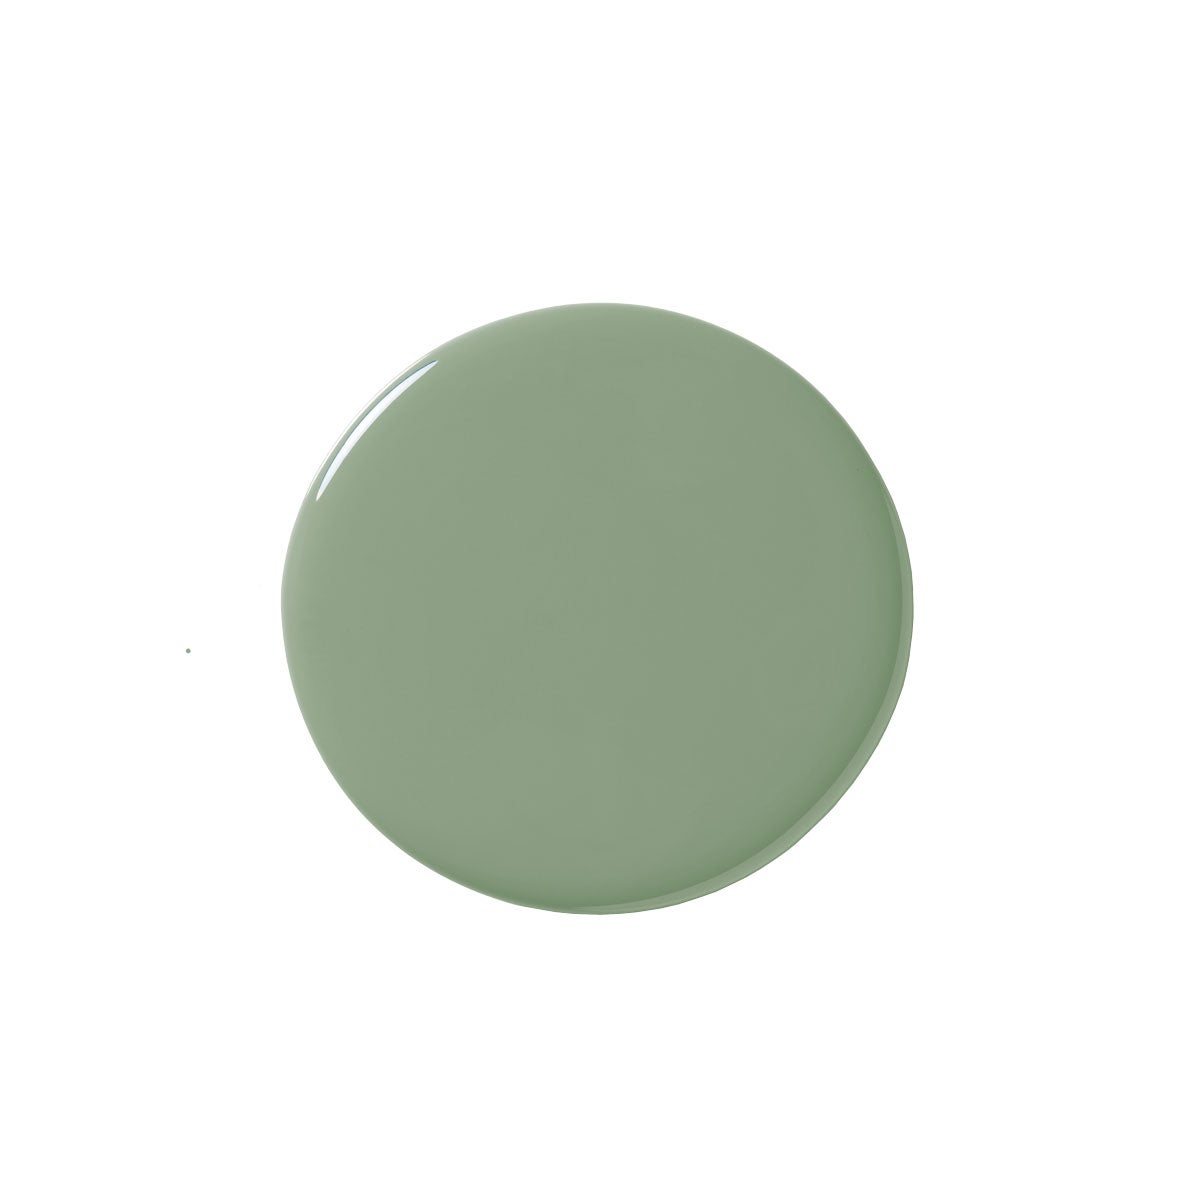 Suffield Green paint swatch